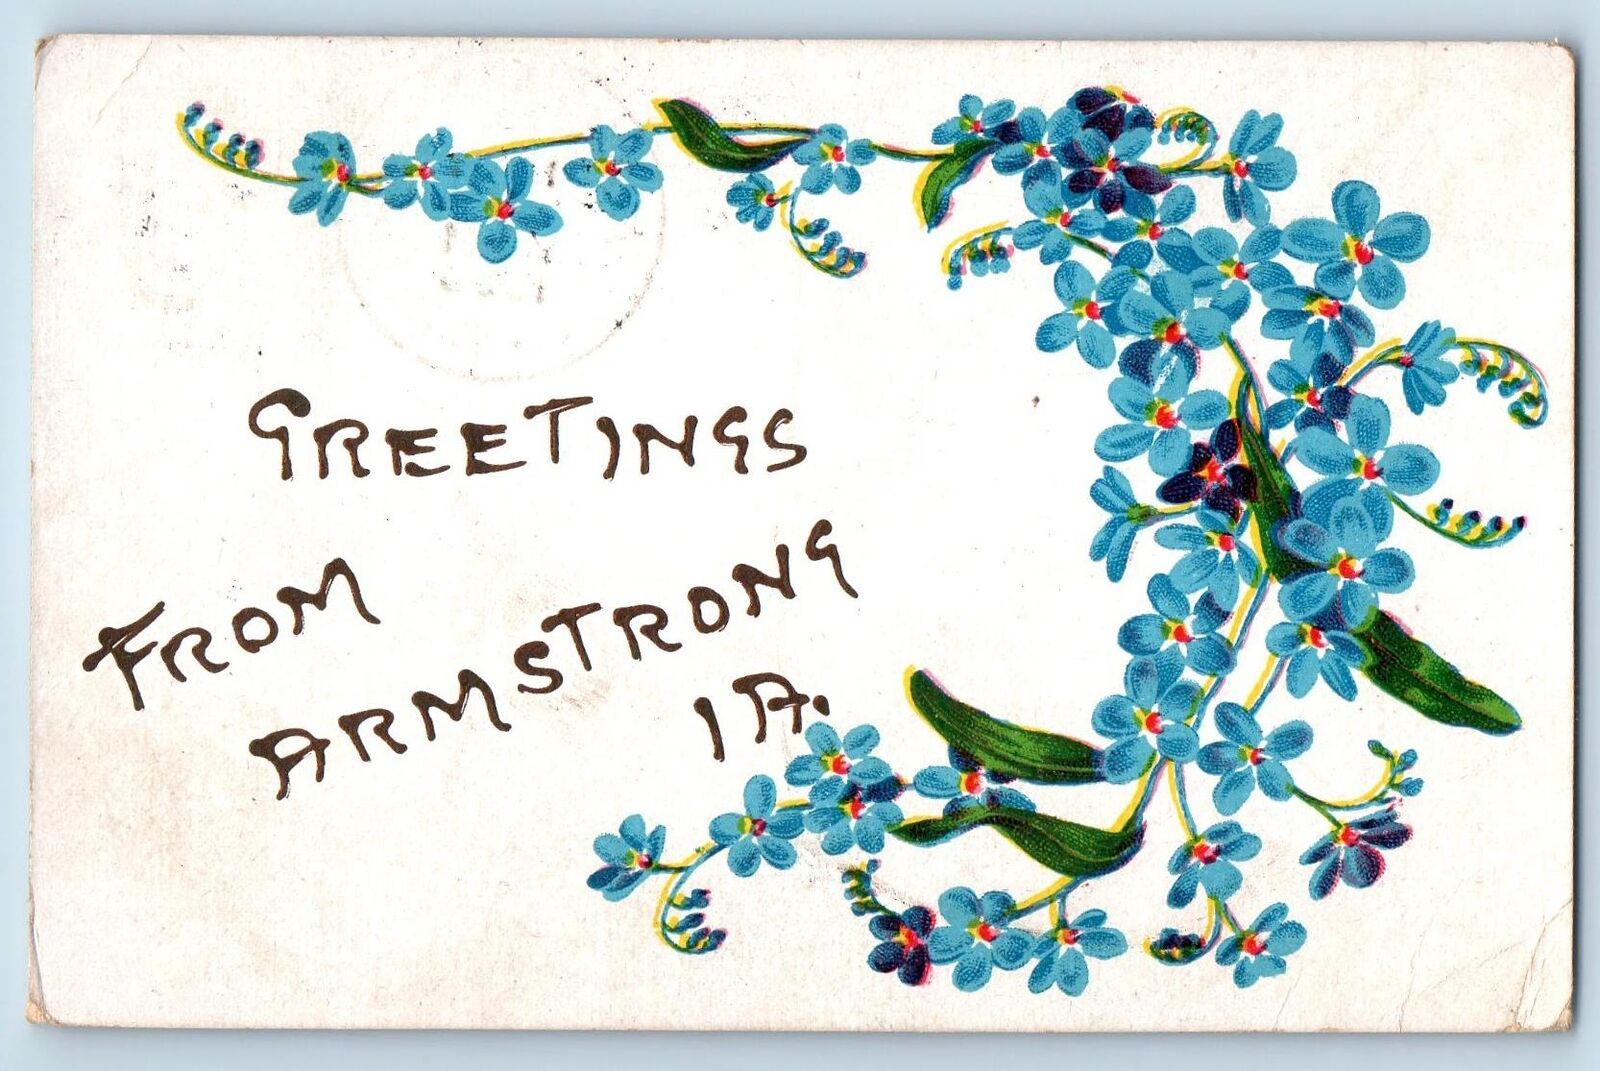 Armstrong Iowa IA Postcard Greetings Little Flowers And Leaves 1908 Antique